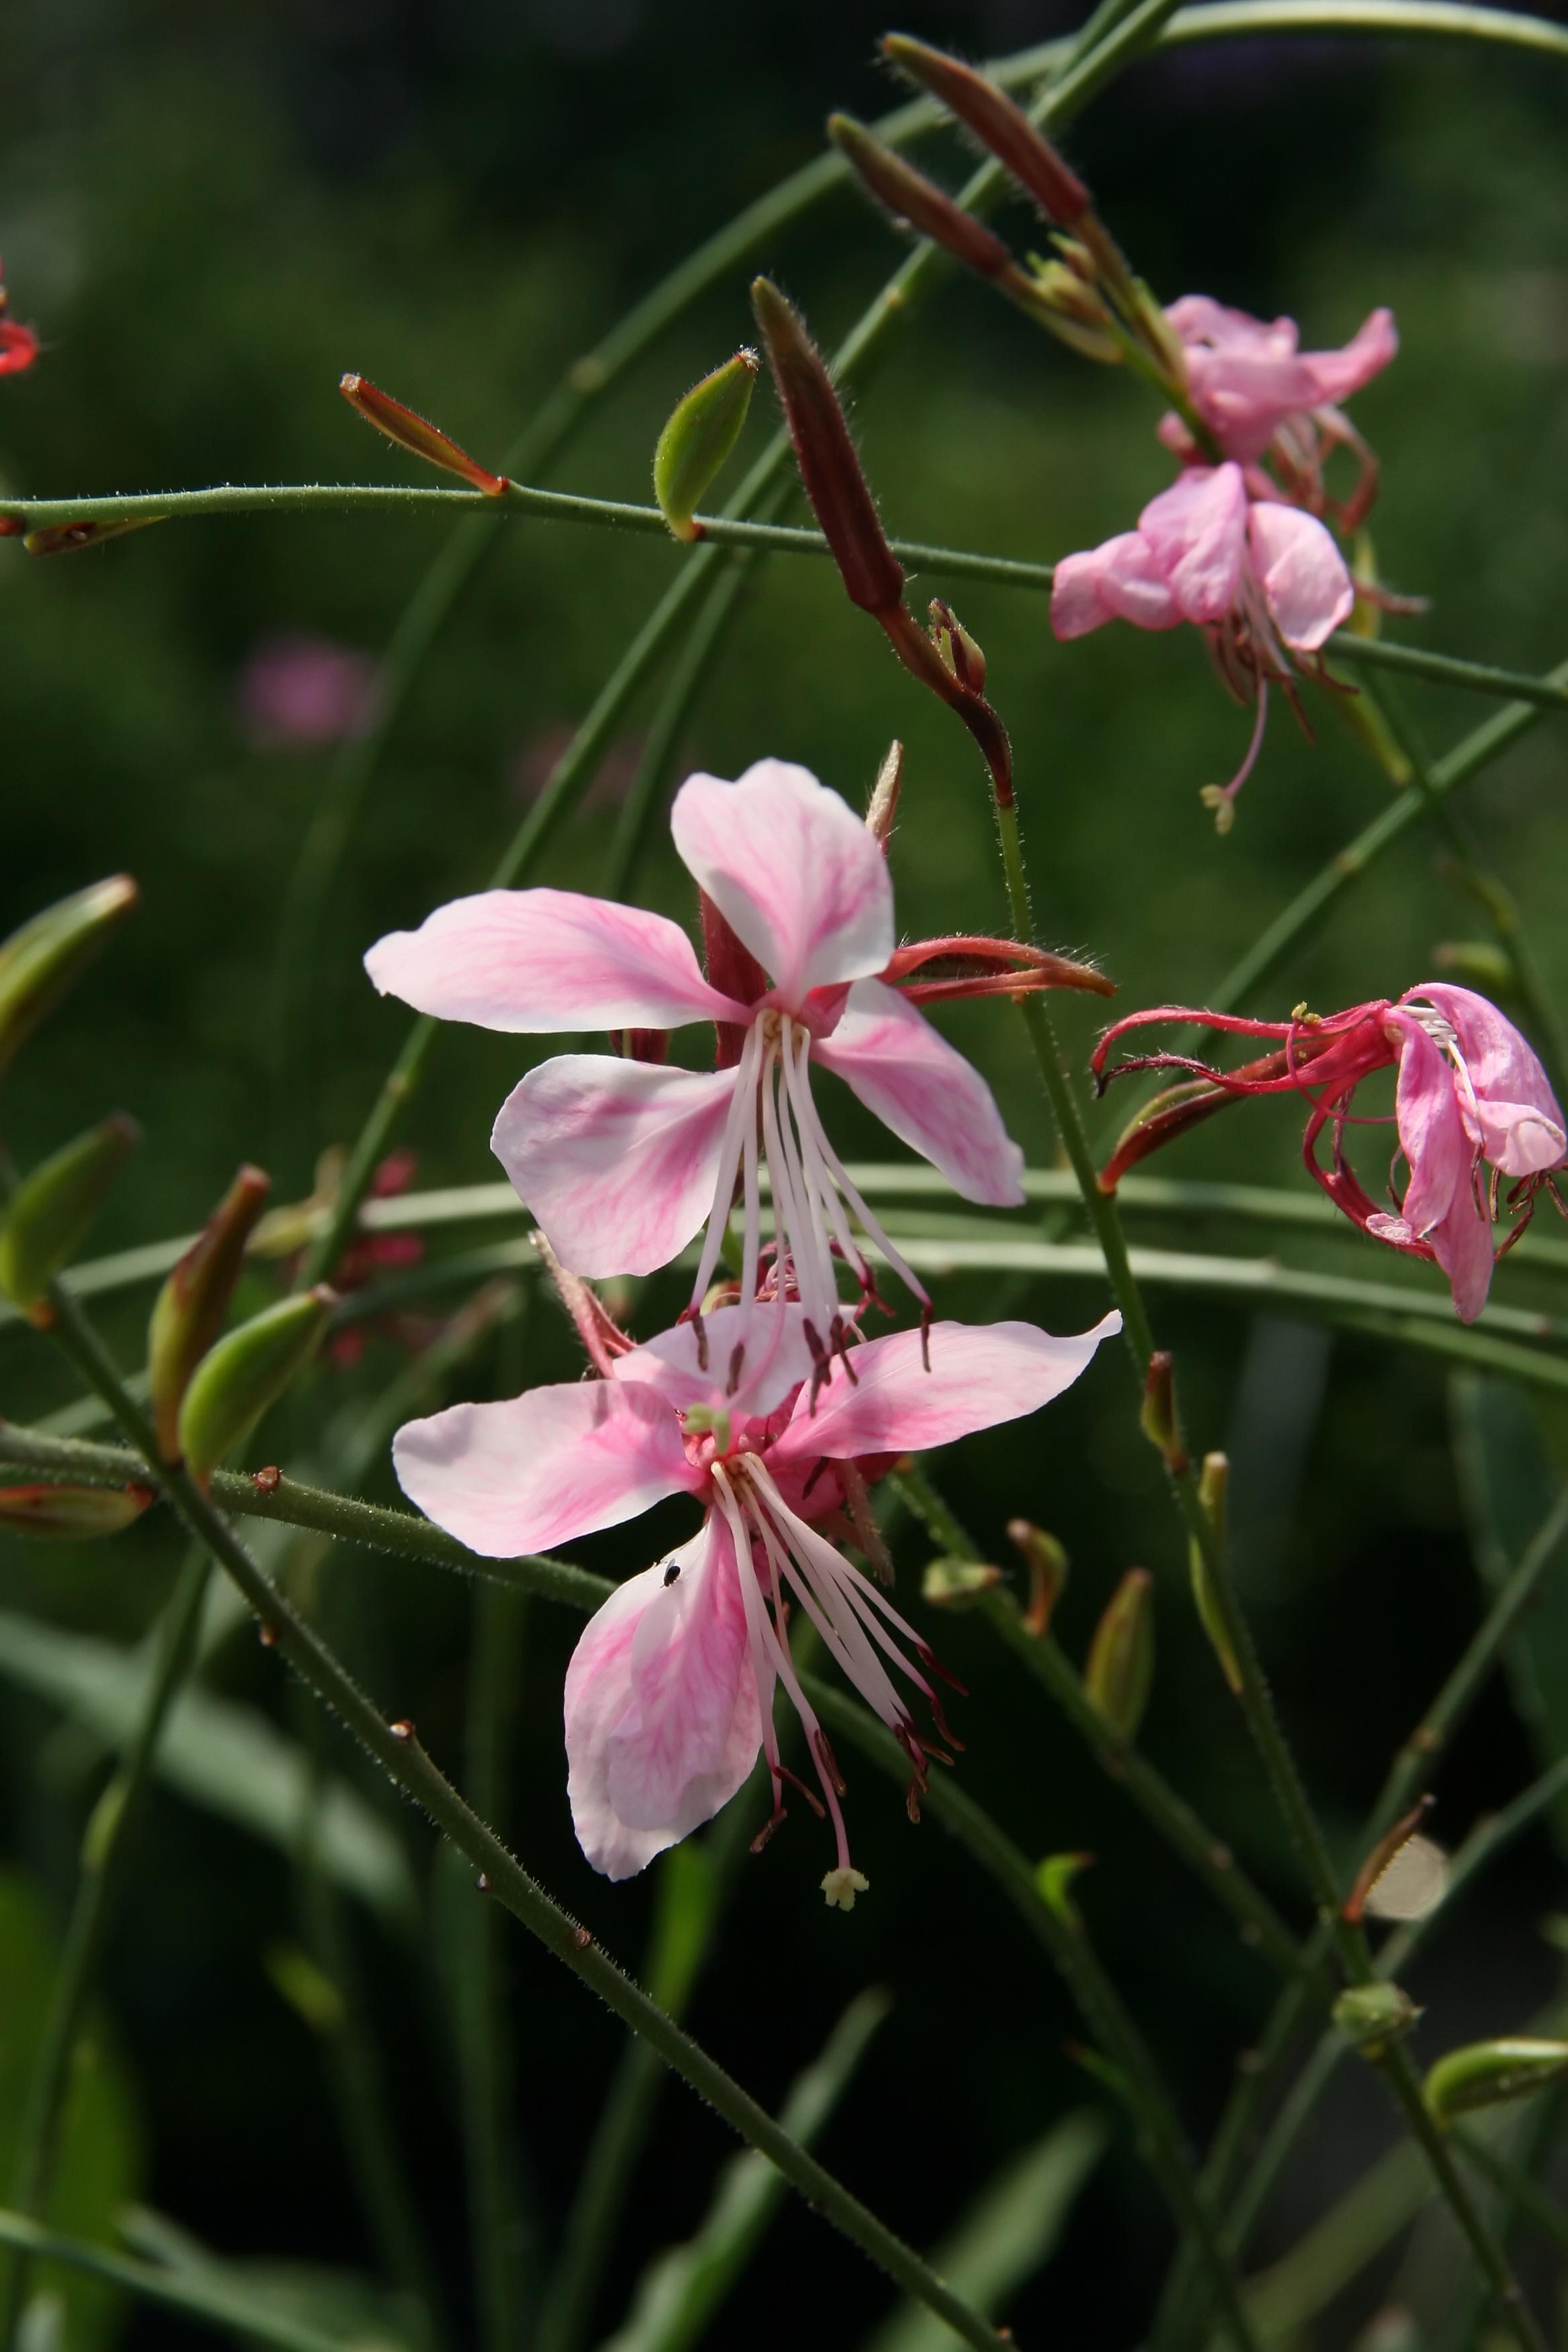 white-pink flowers with white filaments, maroon anthers, lime stigma, green stems and green-brown buds
